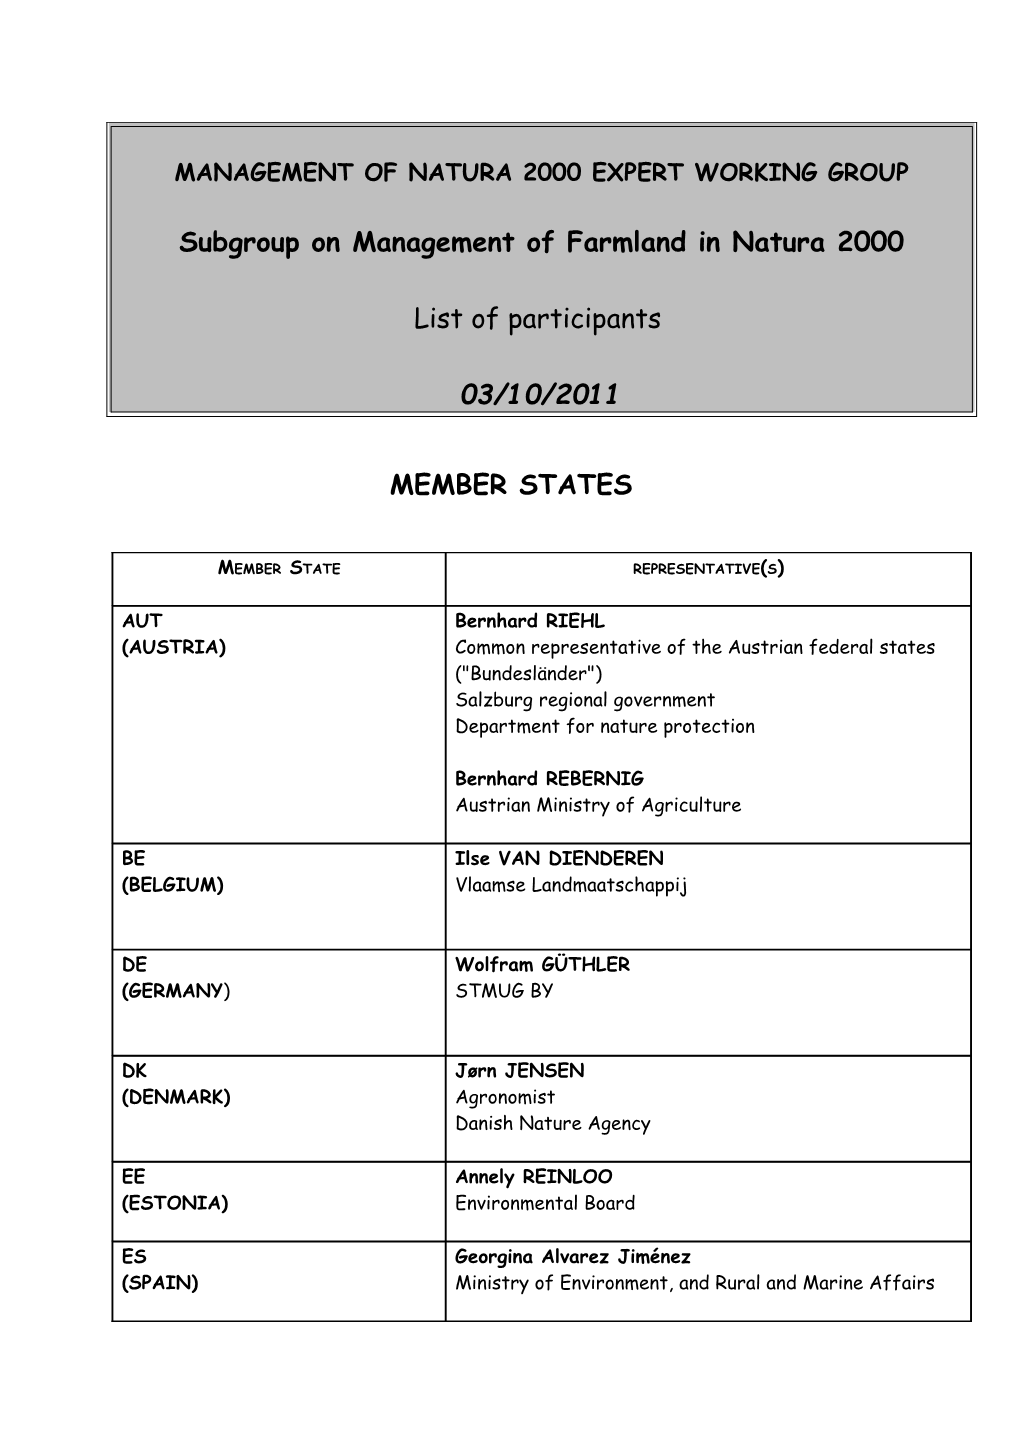 Management of Natura 2000 Expert Working Group